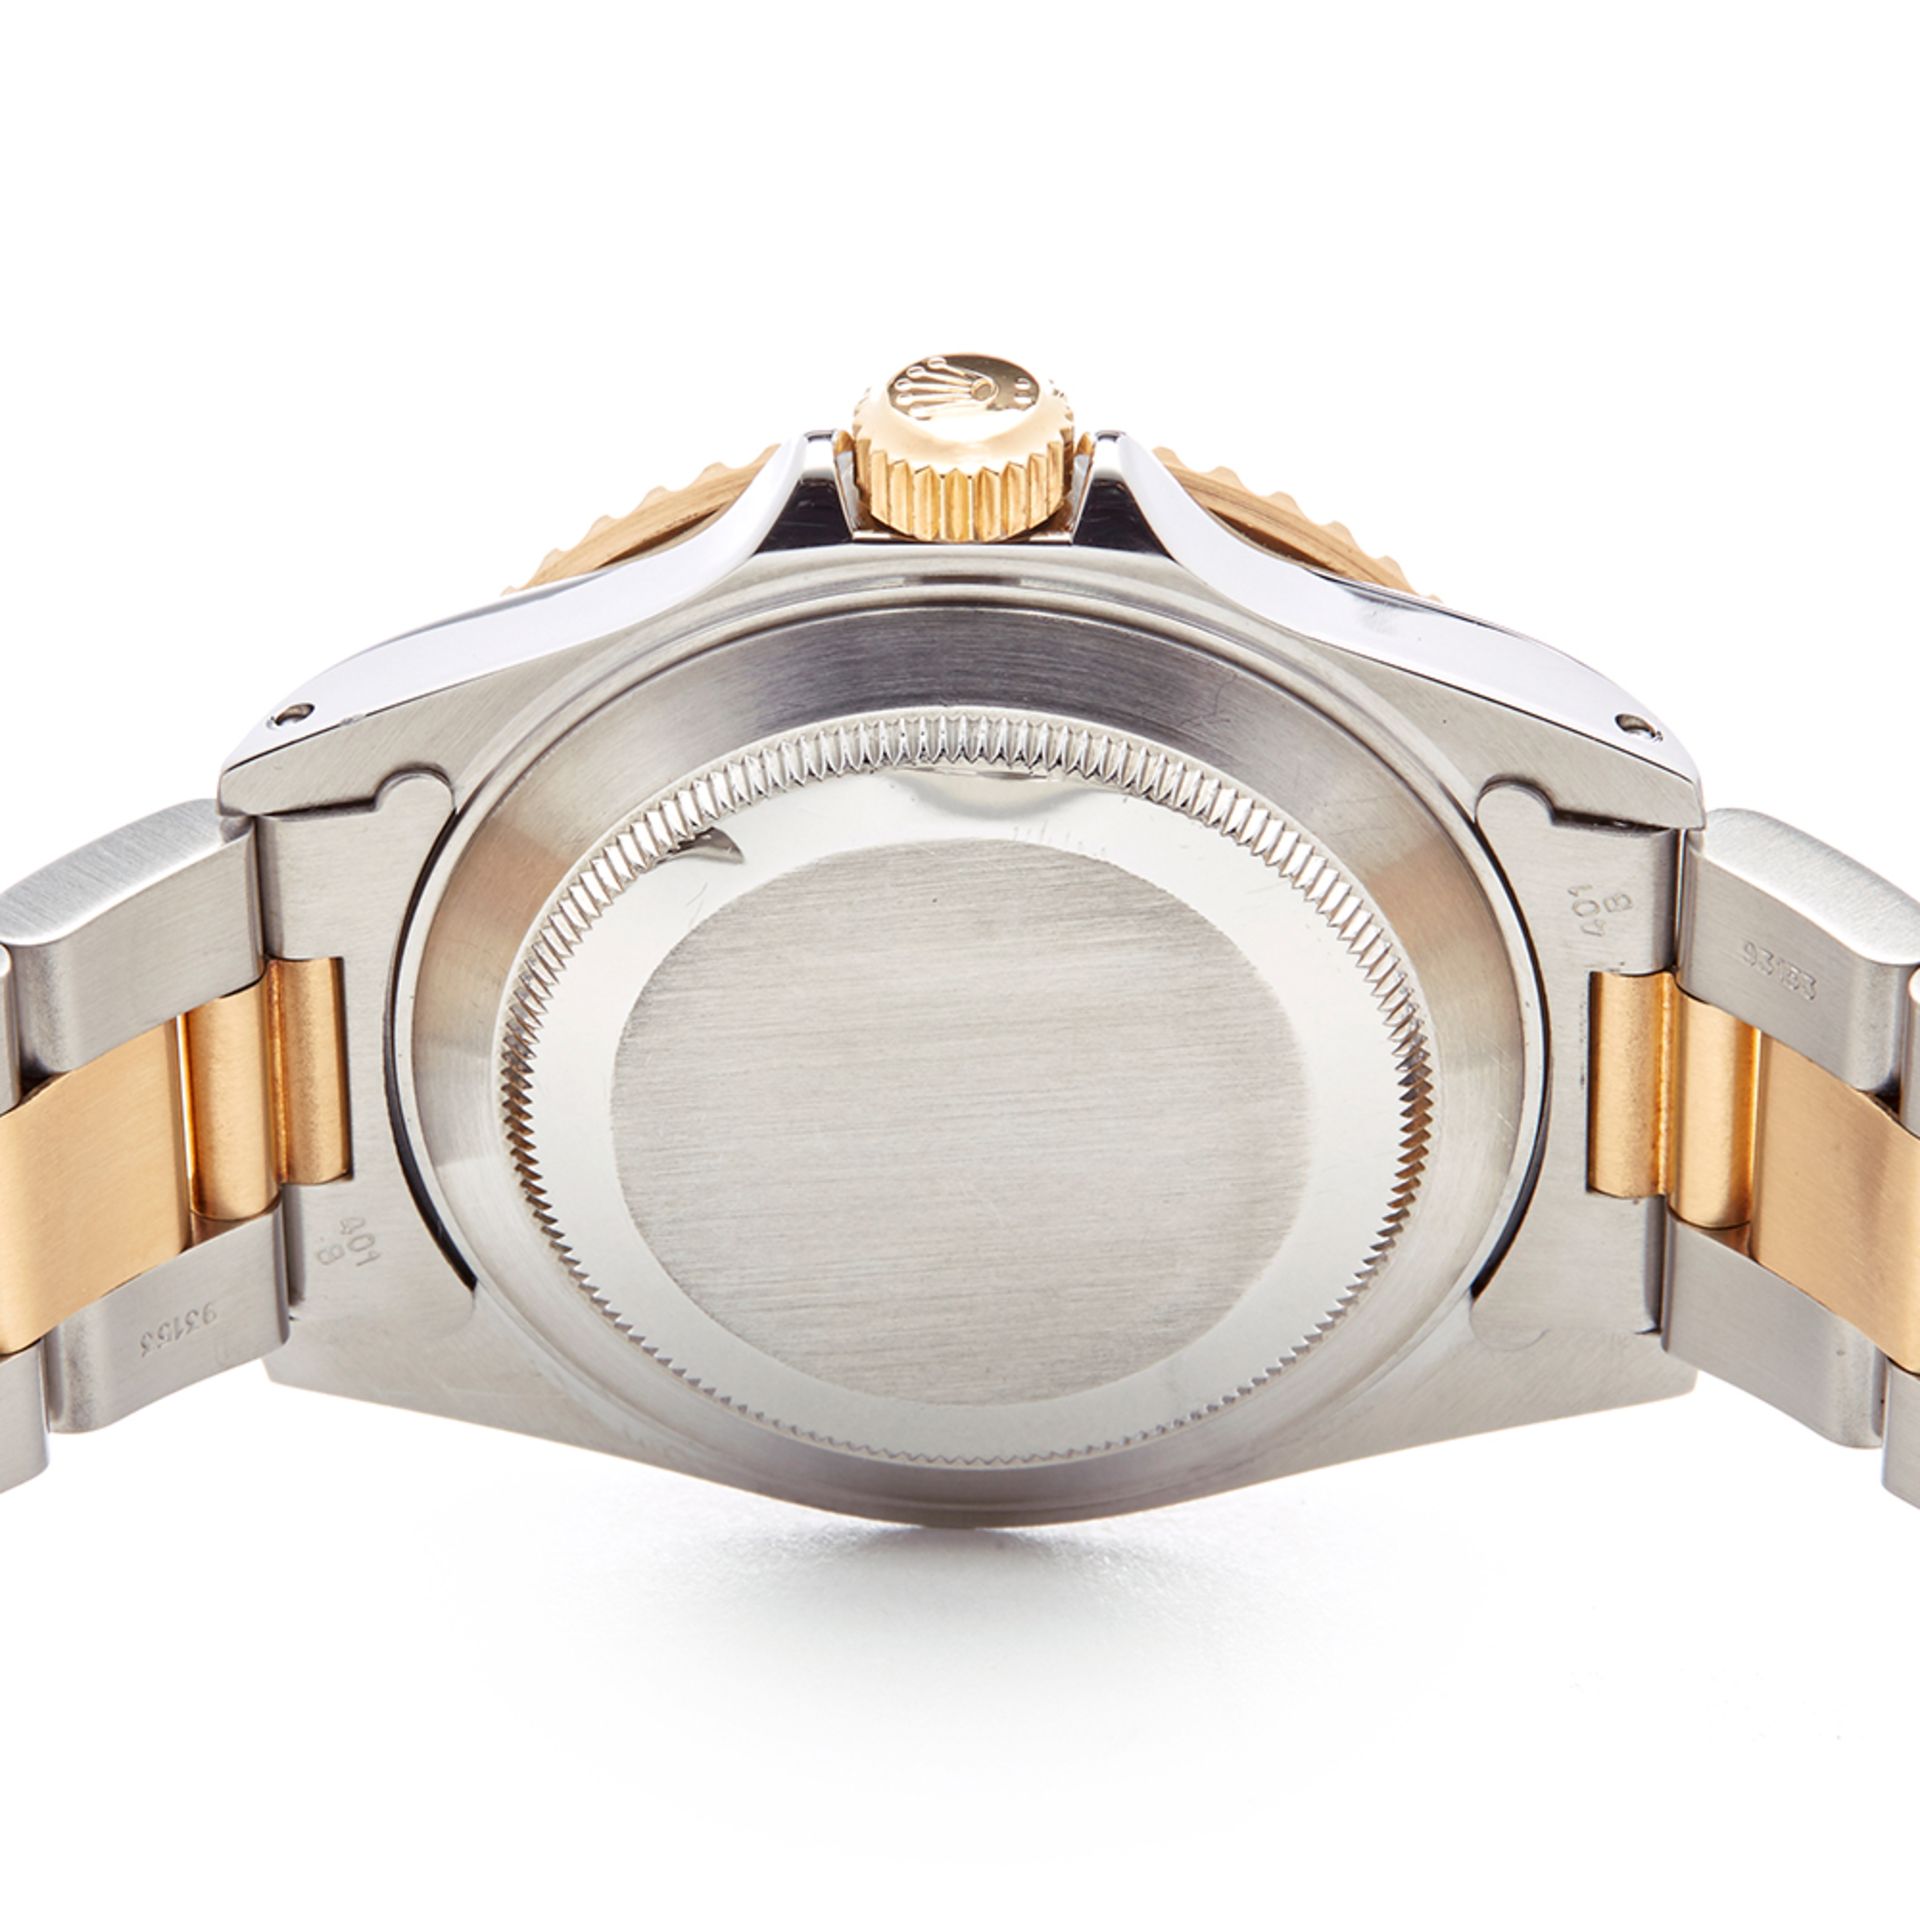 Submariner 40mm Stainless Steel & 18K Yellow Gold - 16613 - Image 7 of 8